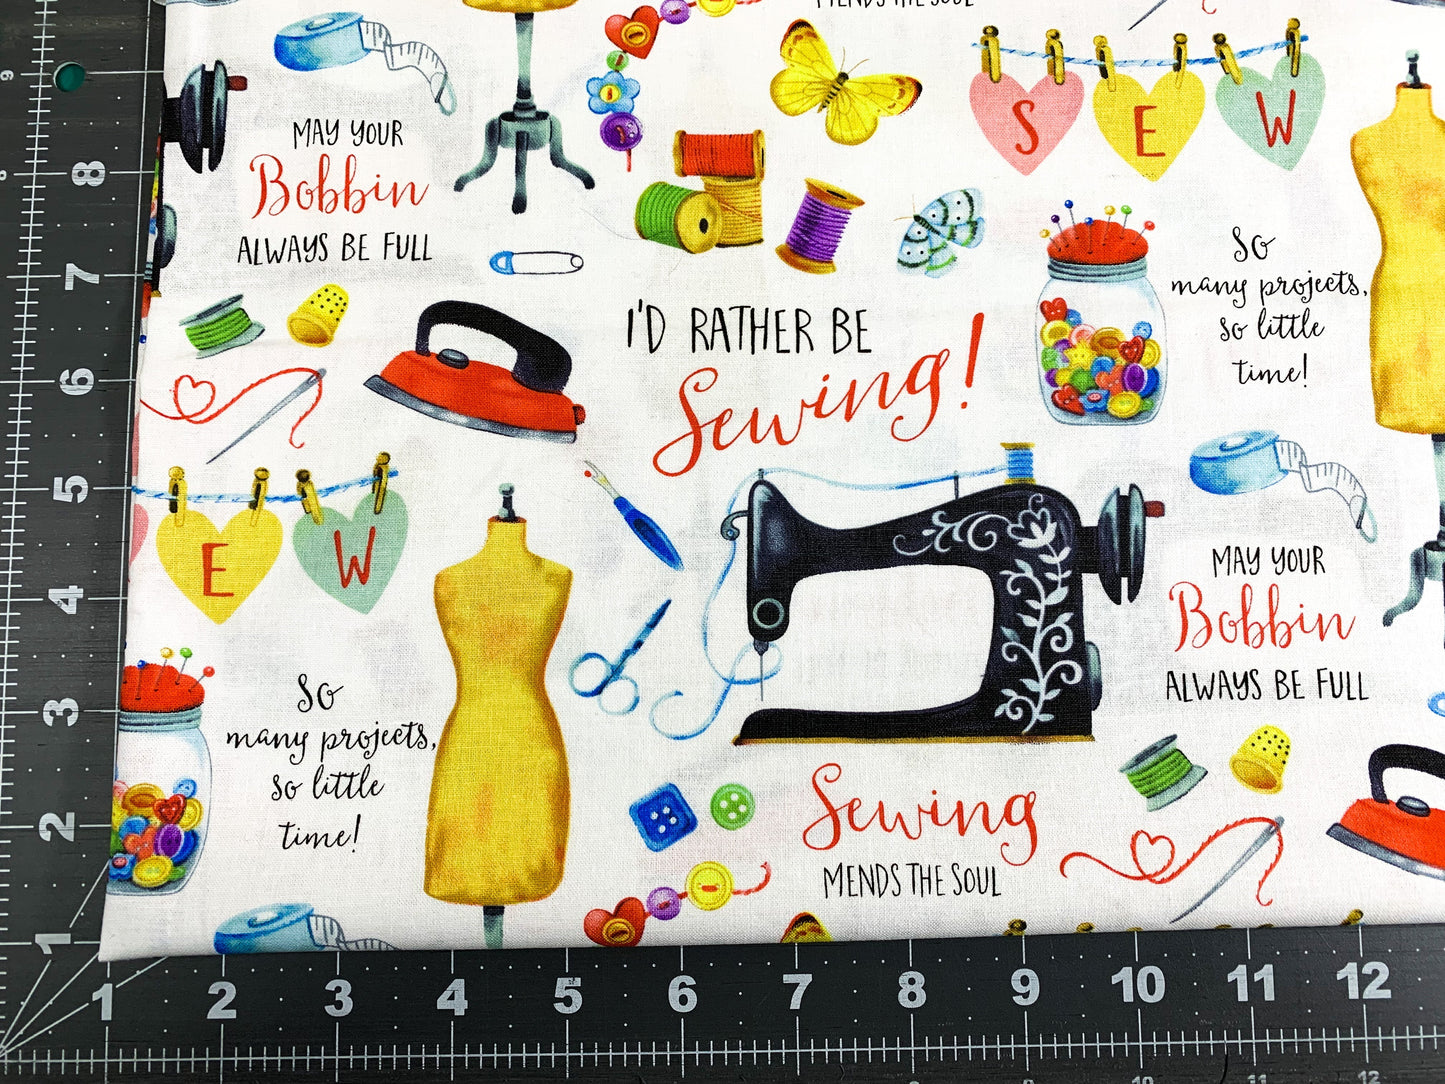 Just Sew Happy Sewing fabric 48687 I'D rather be sewing